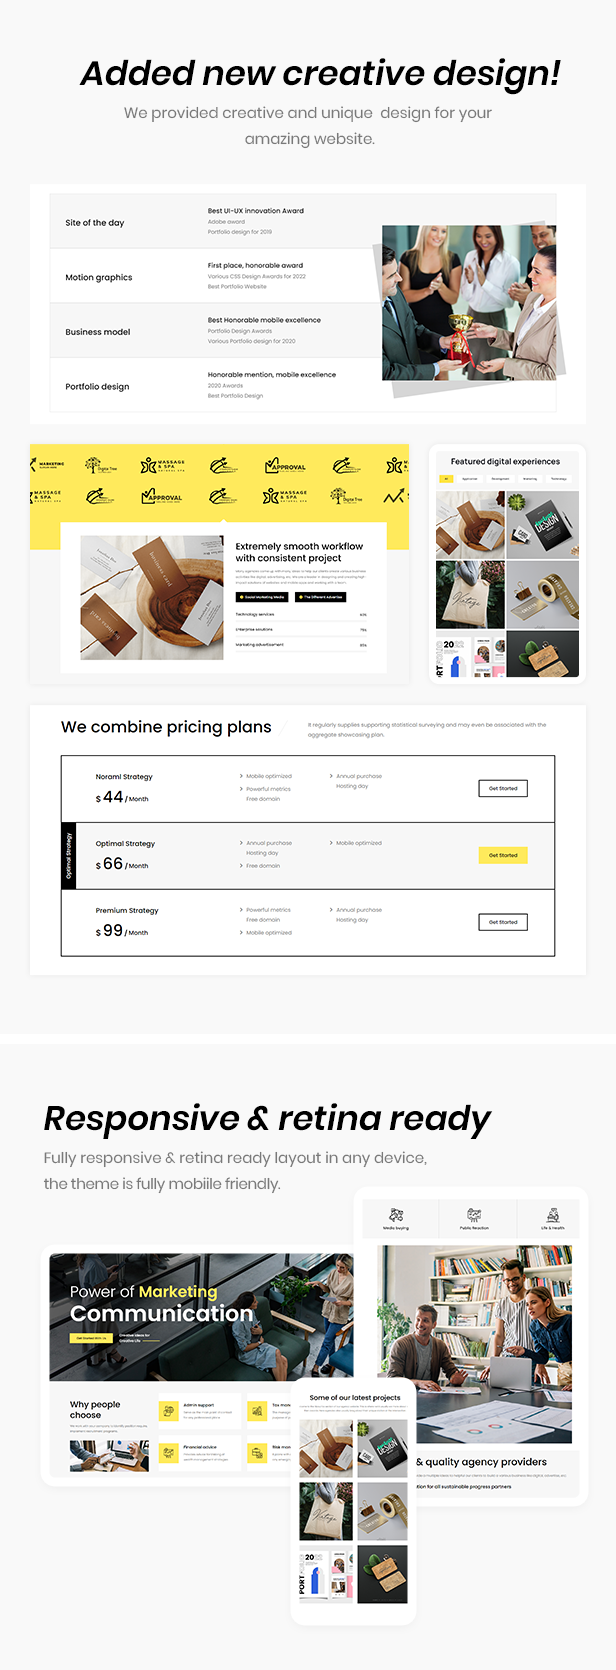 Capiza - Business & Agency HTML5 Template